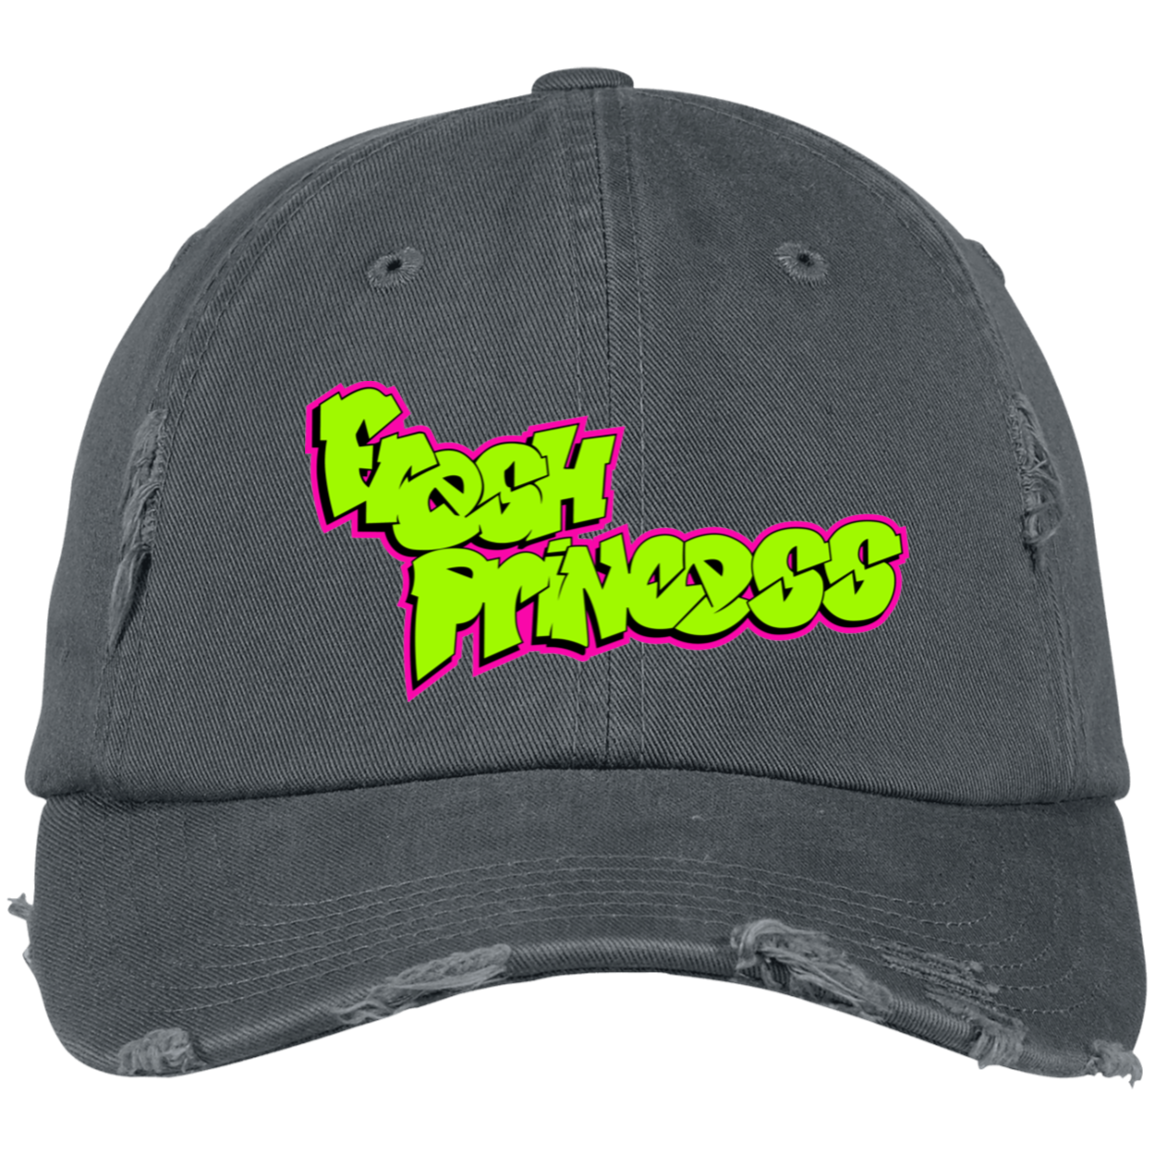 Princess Embroidered Distressed Dad Cap